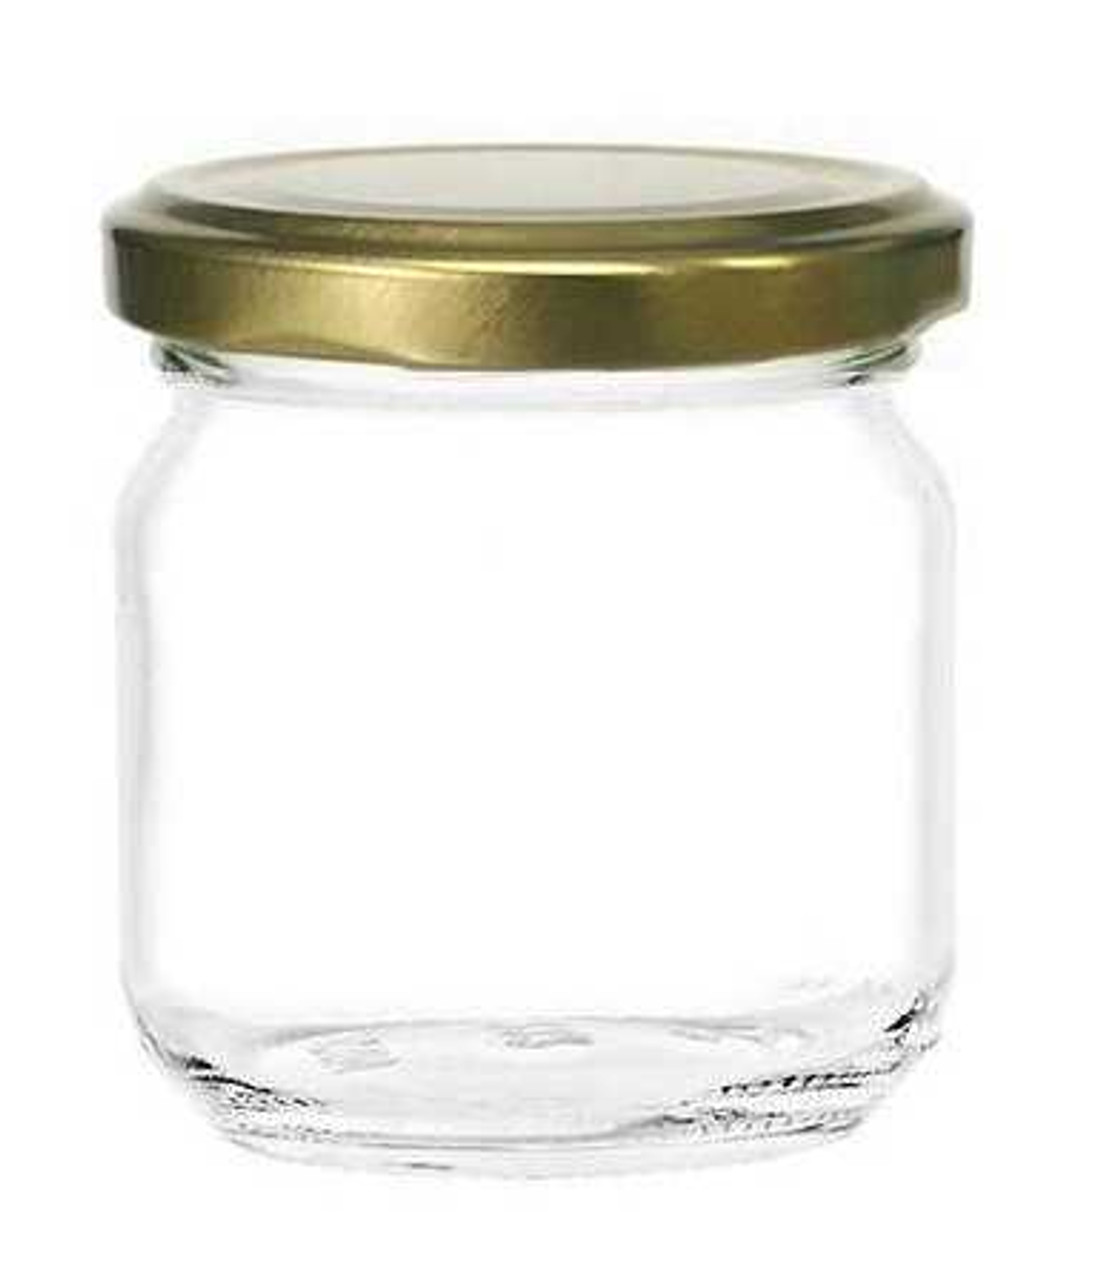 6.75 oz Low Profile Square Glass Jar - Made in Italy